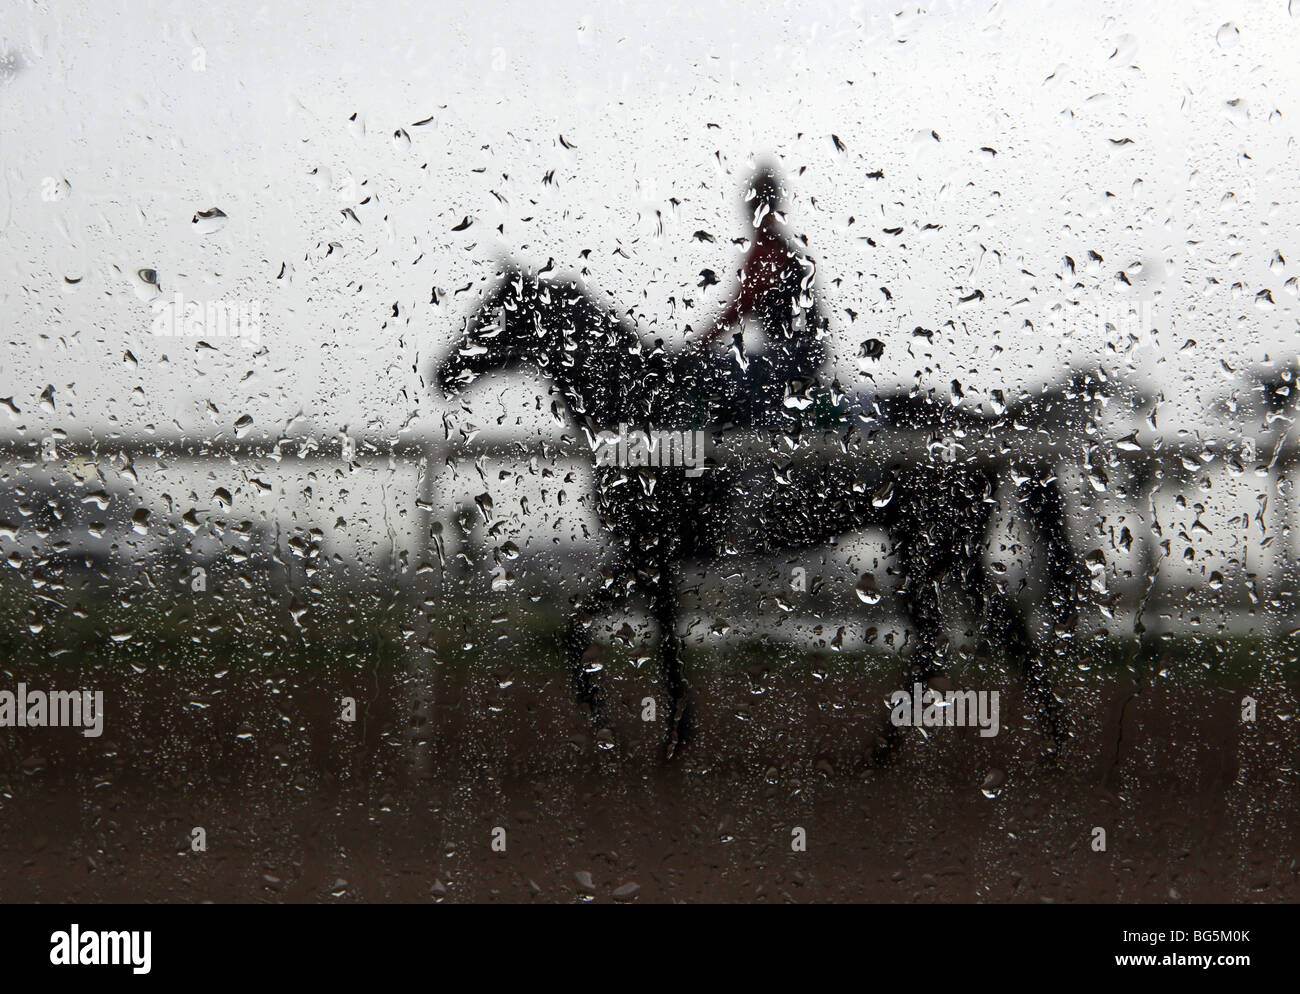 A horse ride in rainy weather Stock Photo